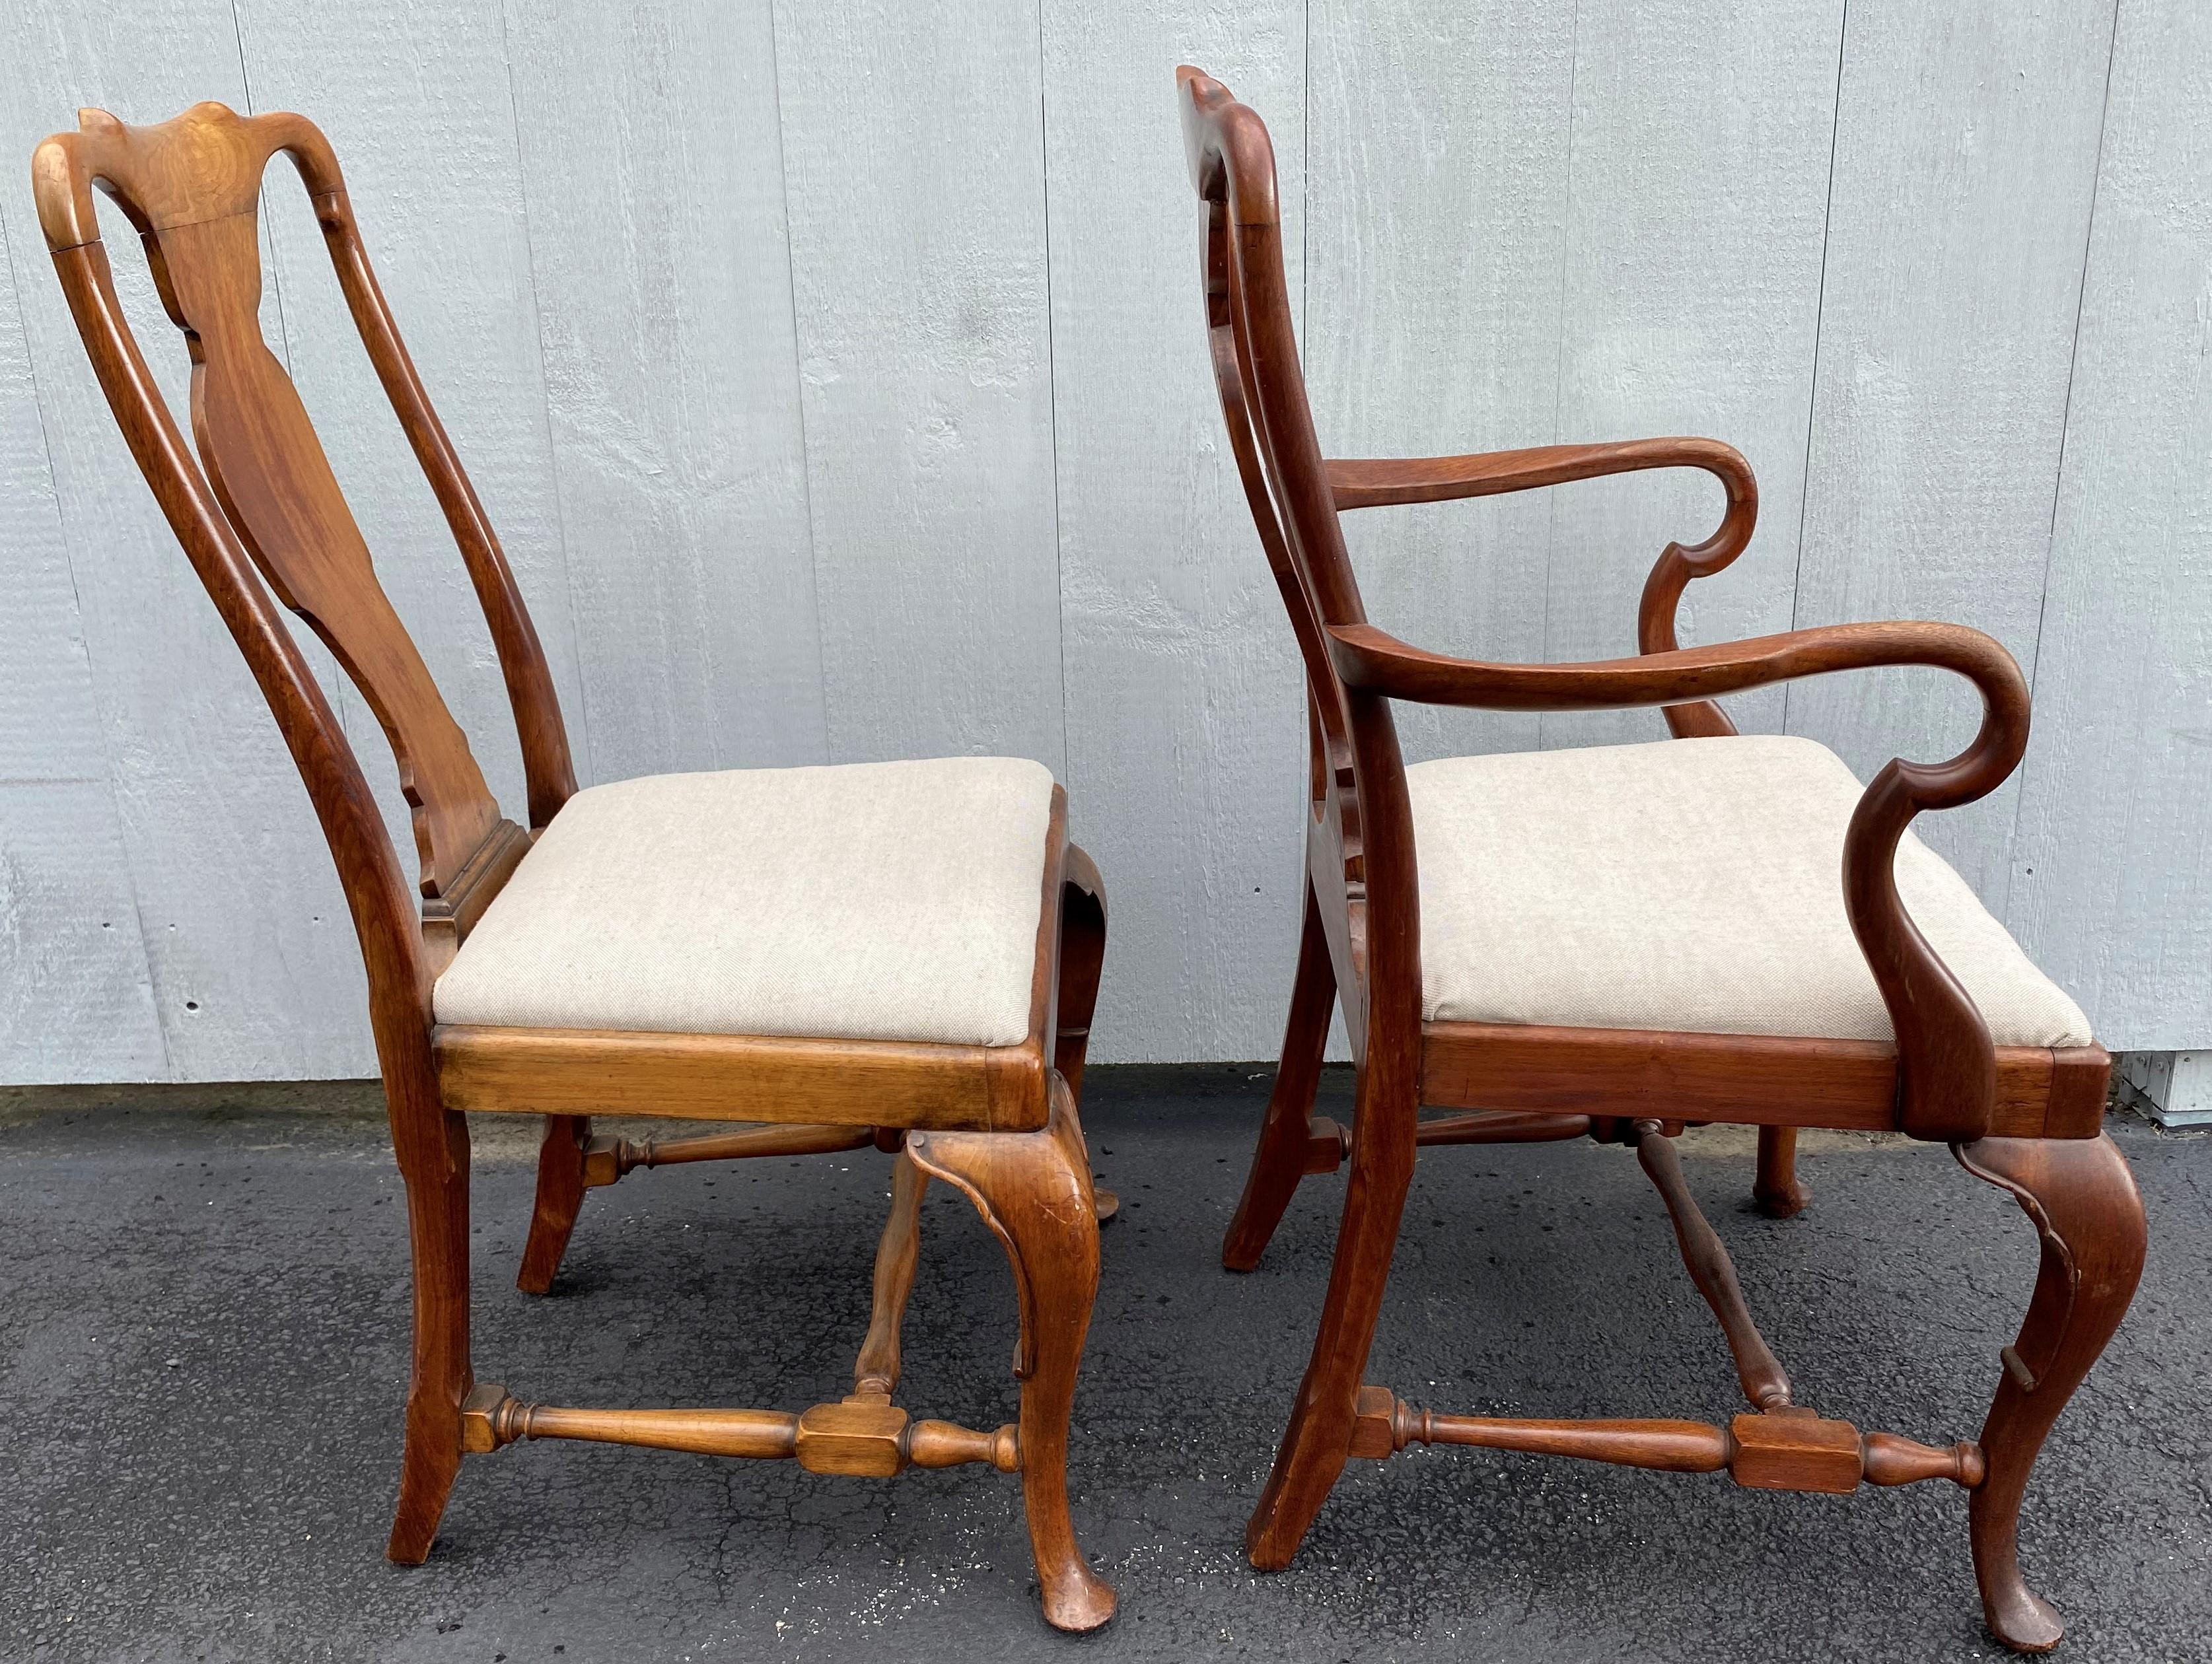 English Set of Six 19th-20th Century Queen Anne Style Mahogany Dining Chairs